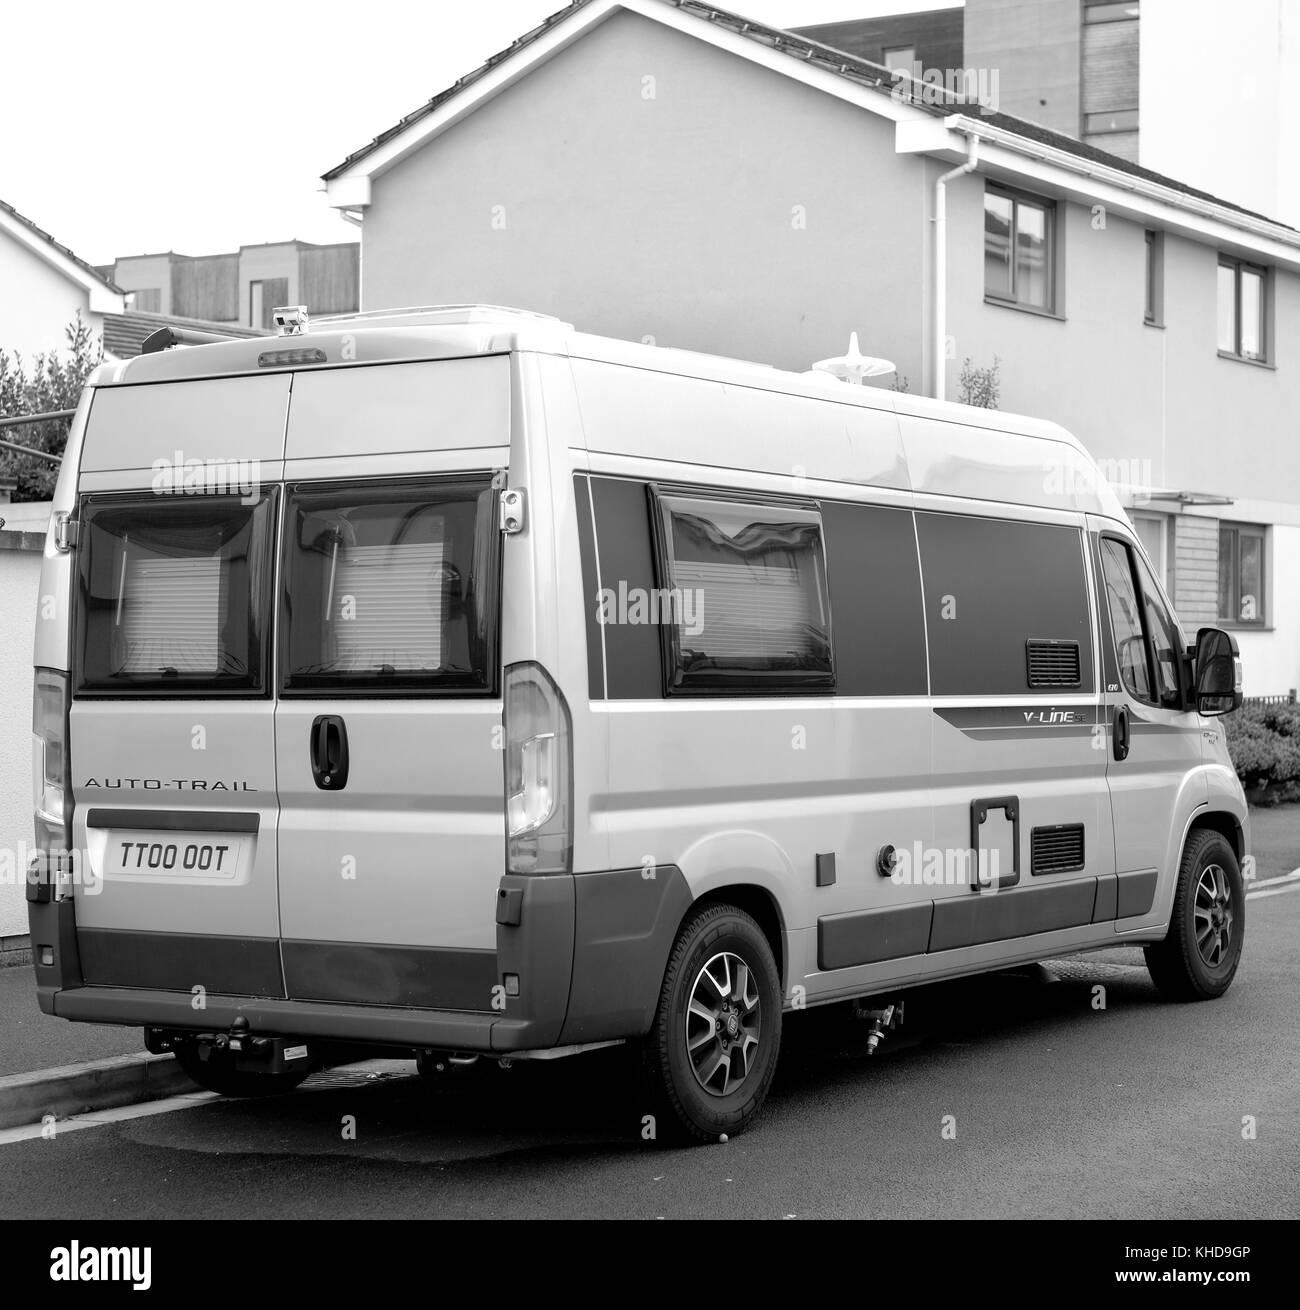 November 2017 - Camper van parked in a residential street, as the owner has no off street parking avilable in a suburbam environment. Stock Photo